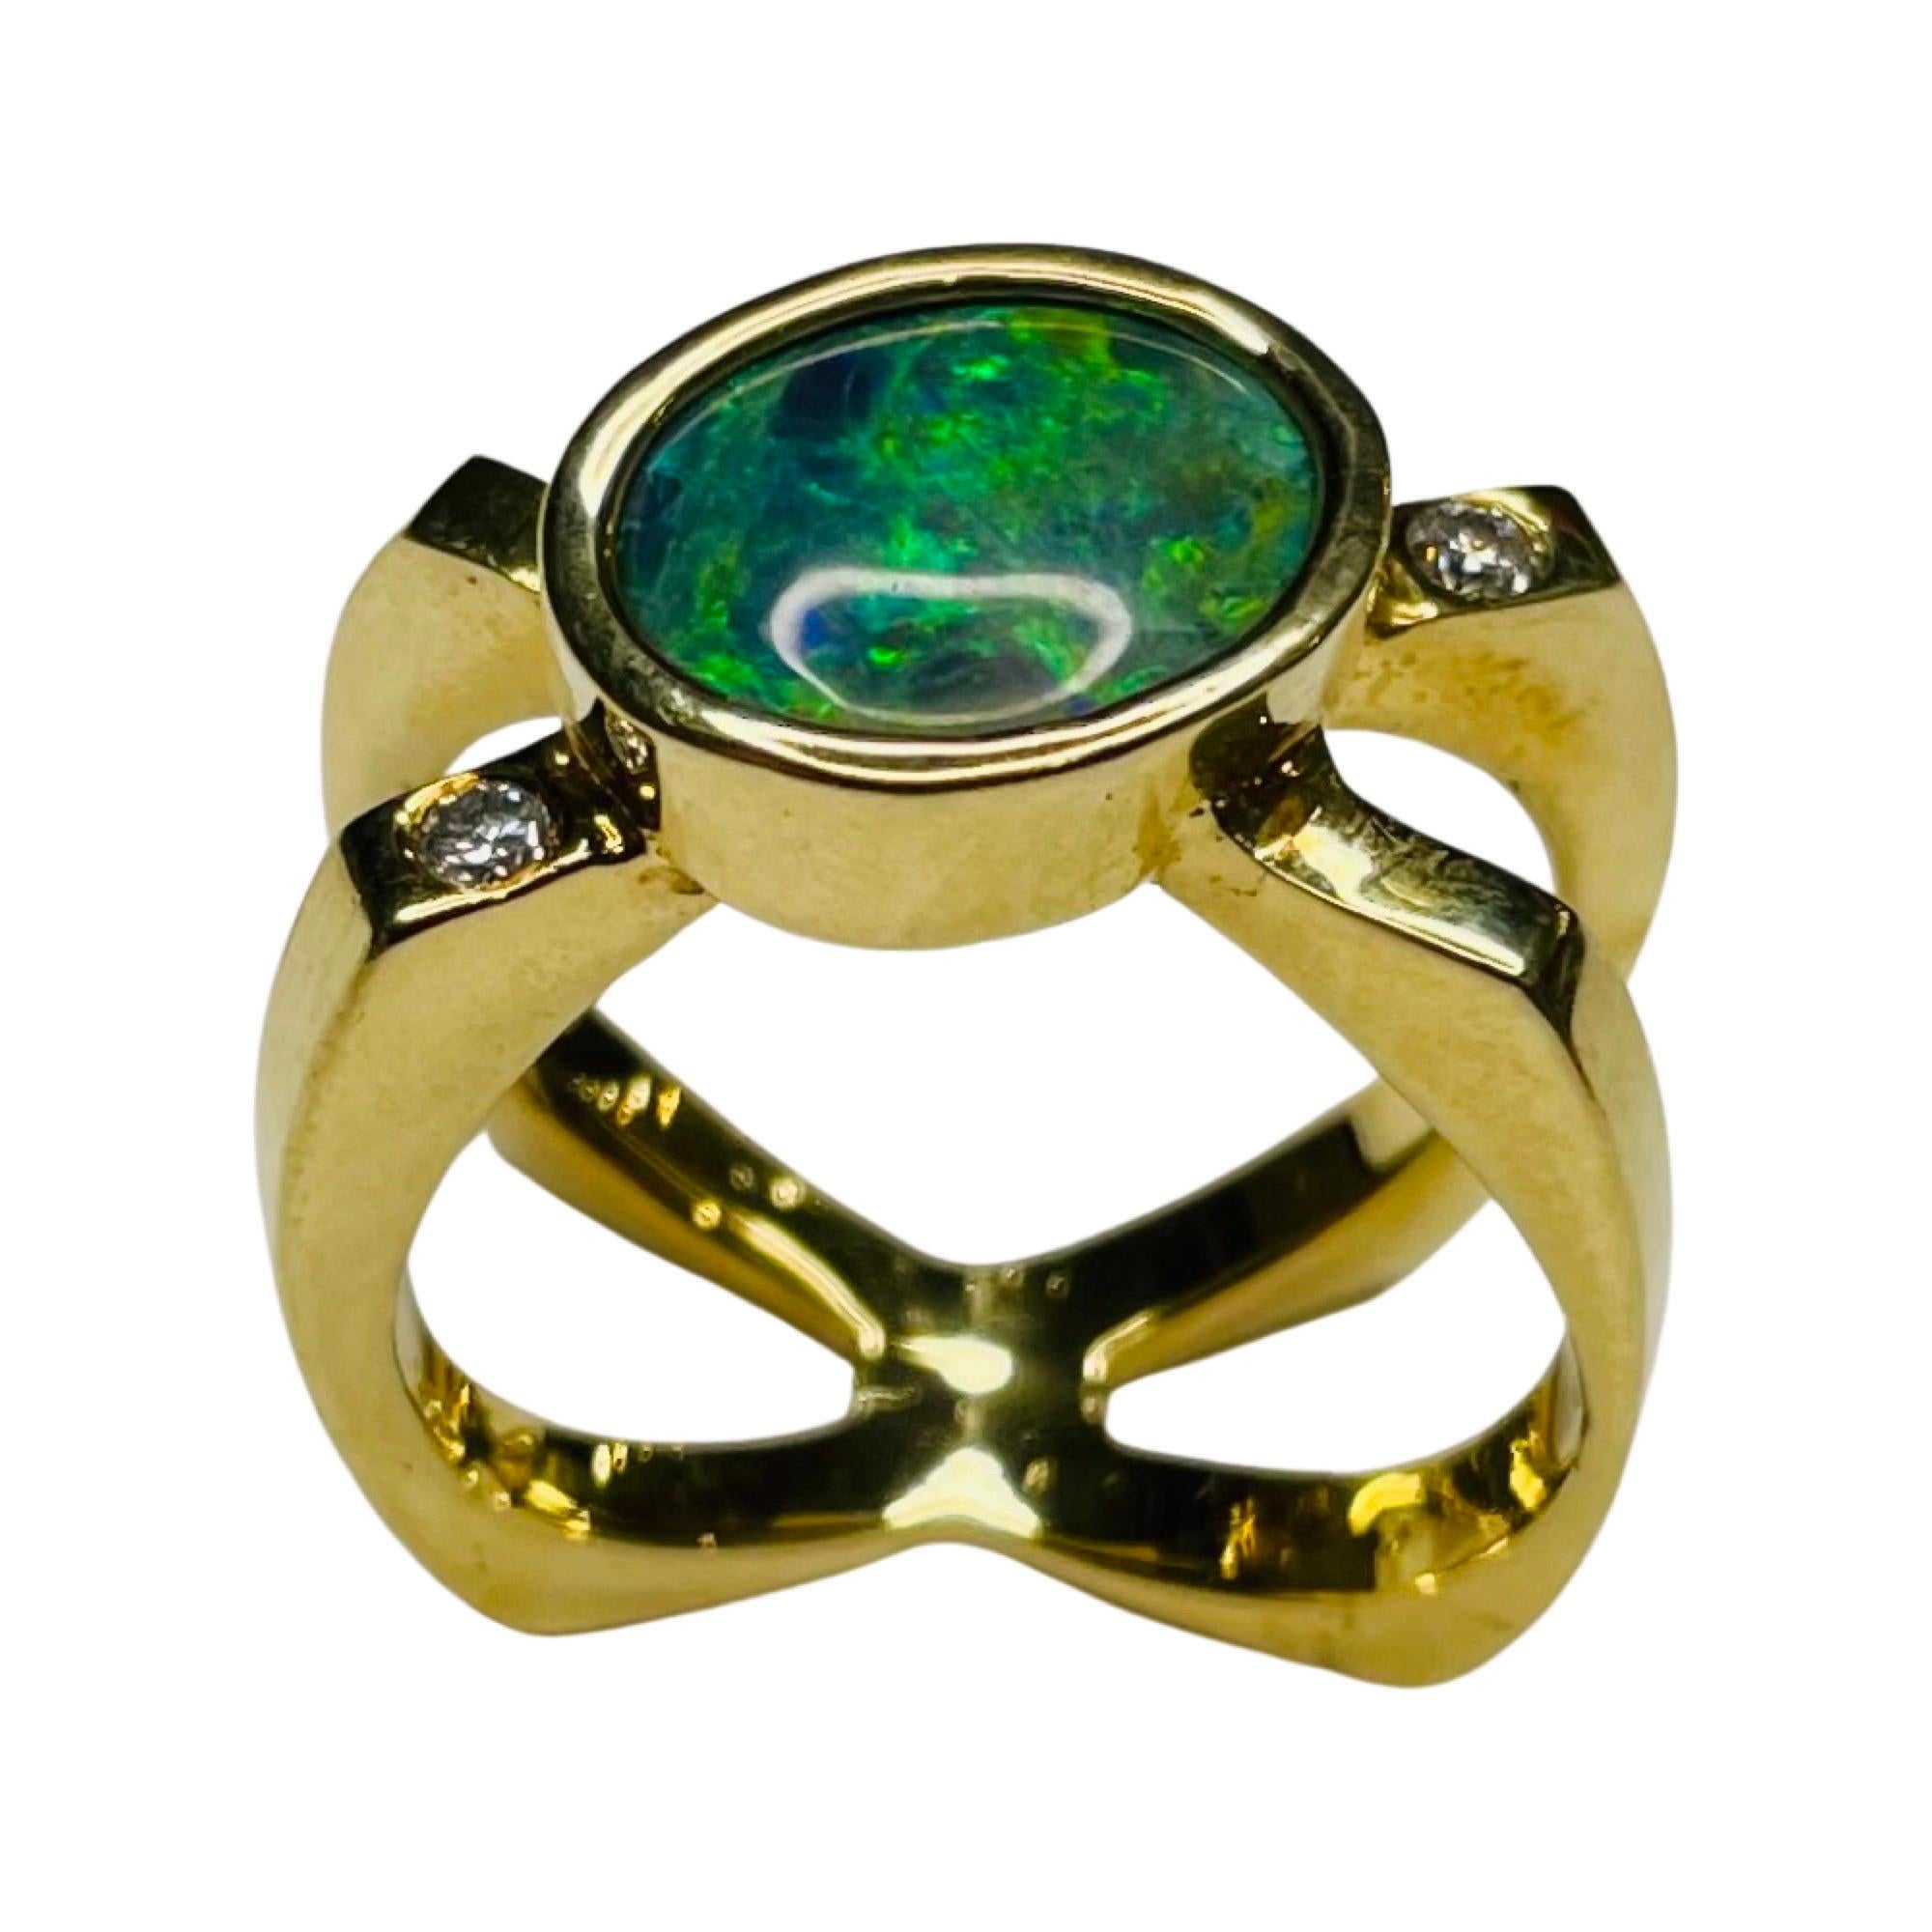 Lithos 18K Yellow Gold Natural Black Opal Ring.  The ring has 4 full cut round brilliant diamonds.  There is a total carat weight of  0.08 carats.  They are of VS clarity and G color. The diamonds are burnish set. The bezel set black opal is 2.75